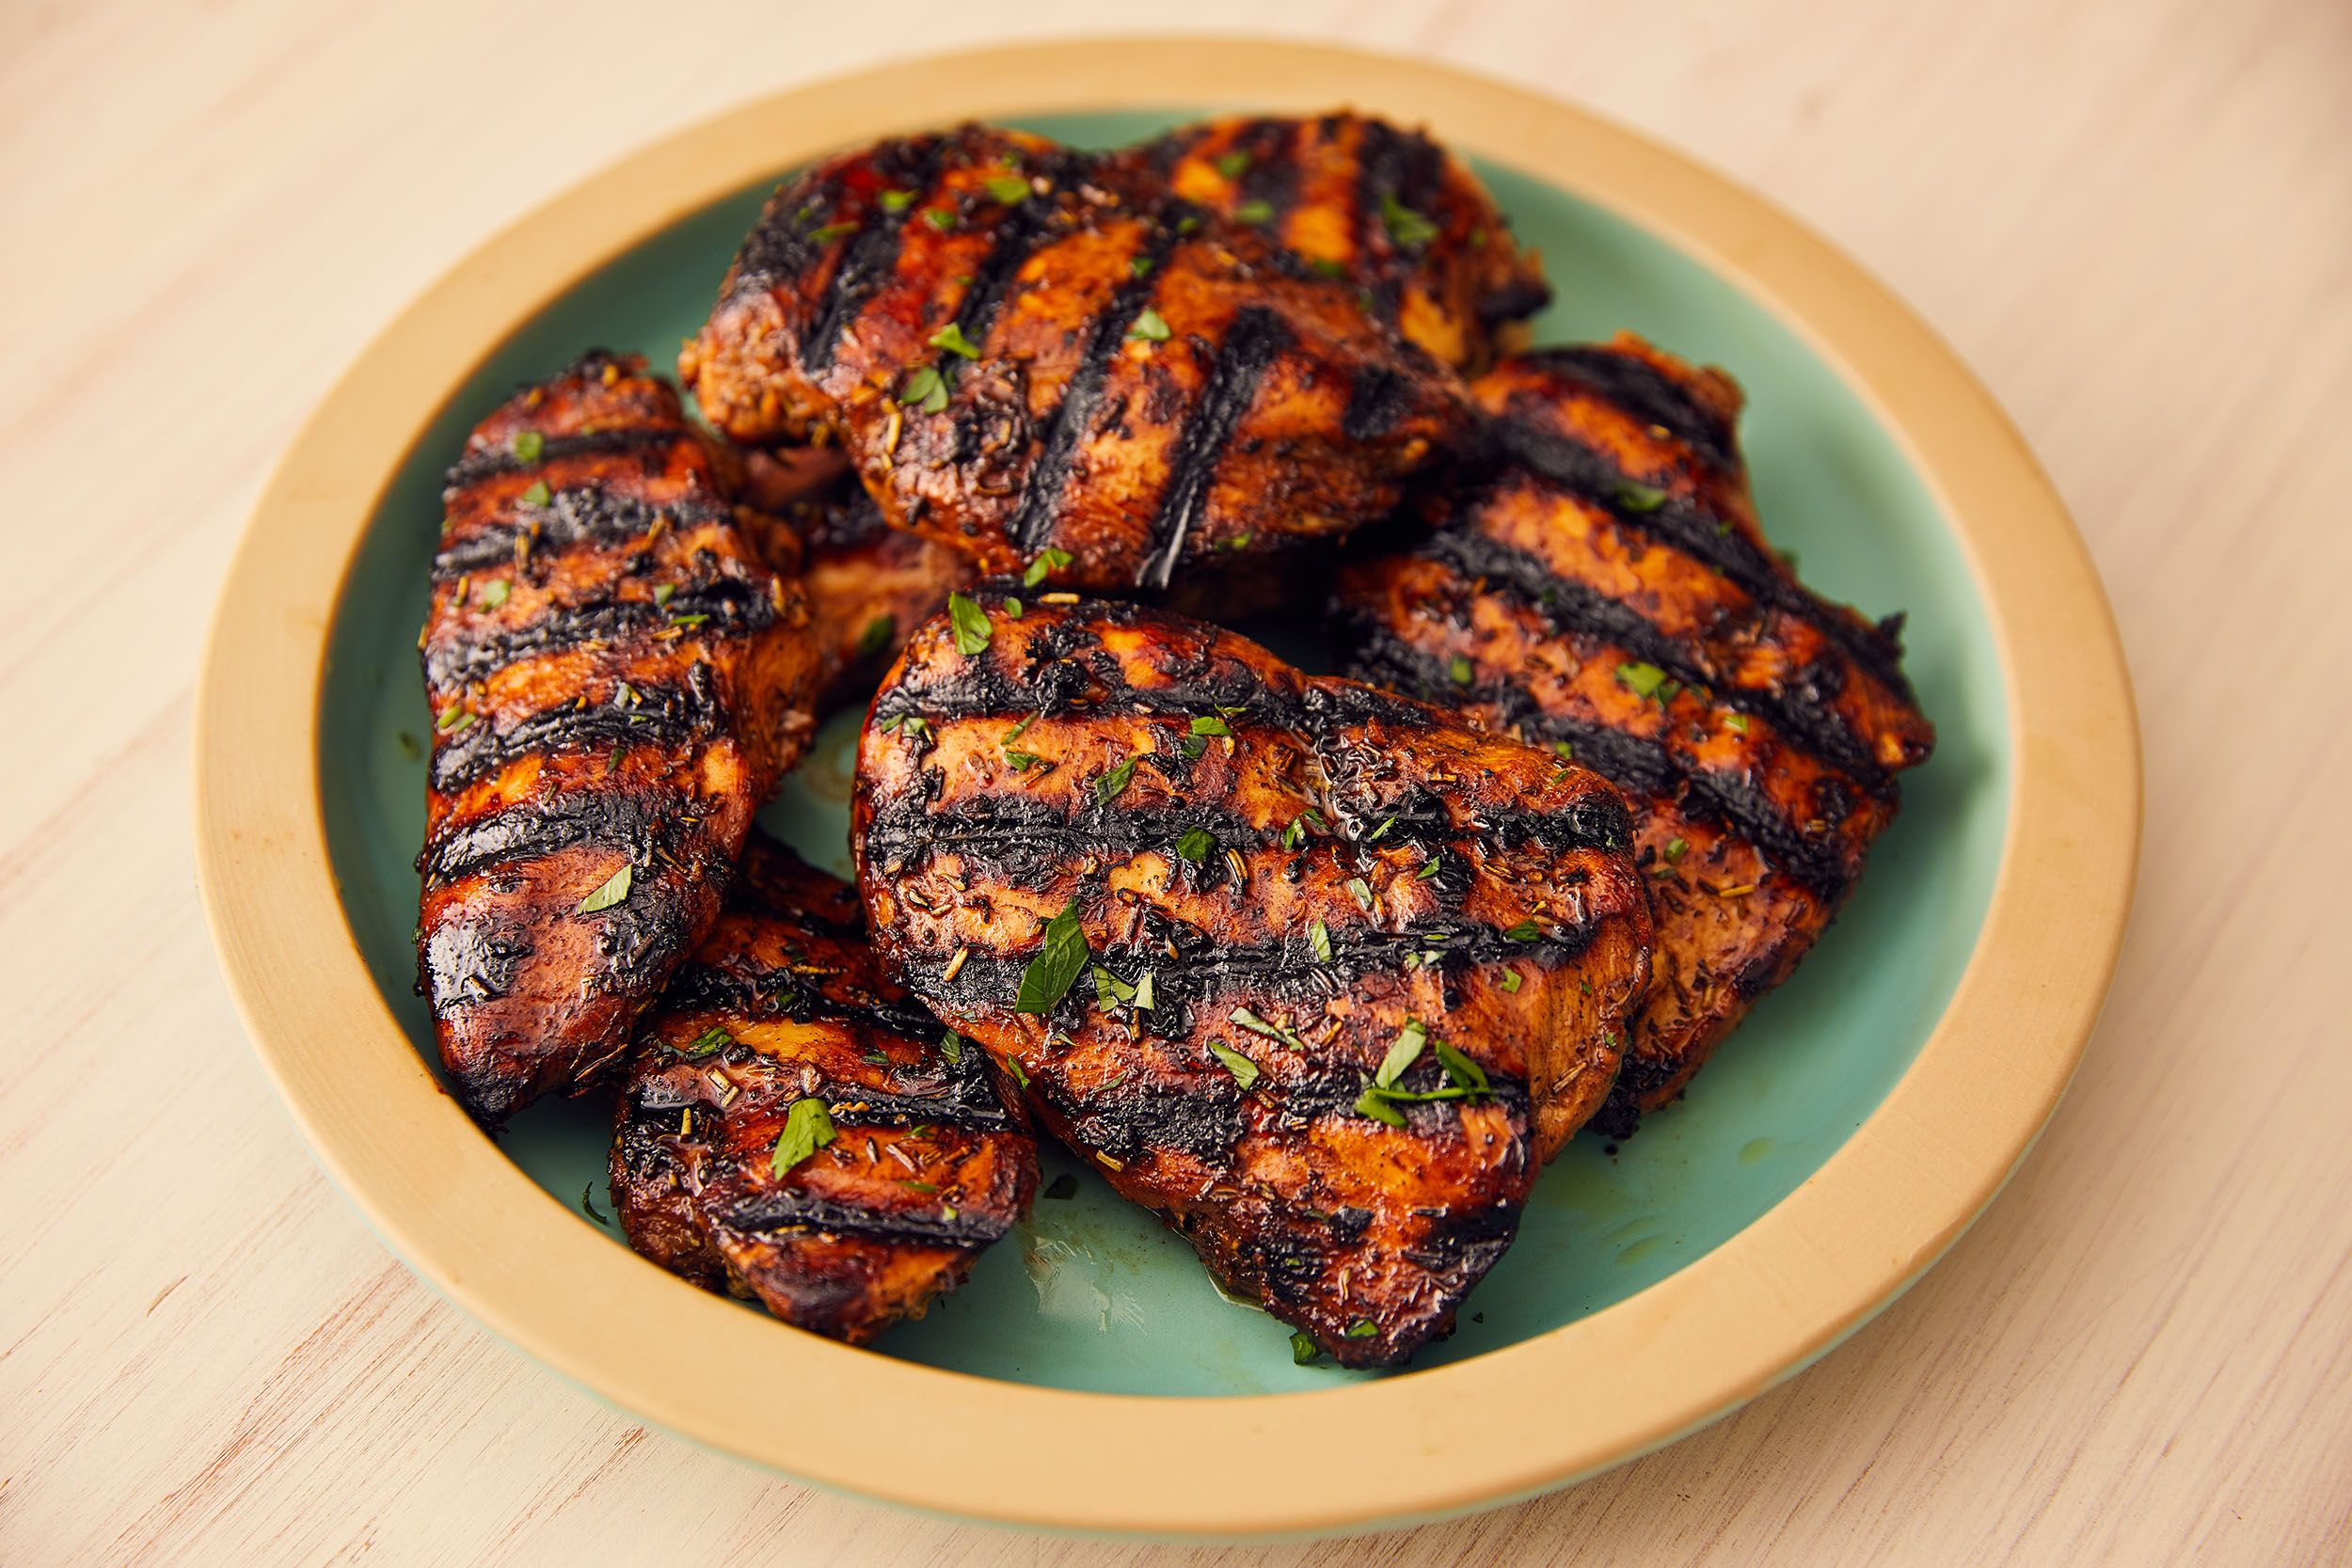 Best Grilled Chicken Breast Recipe How To Grill Juicy Chicken Breast,Stainless Steel Gas Grills On Sale